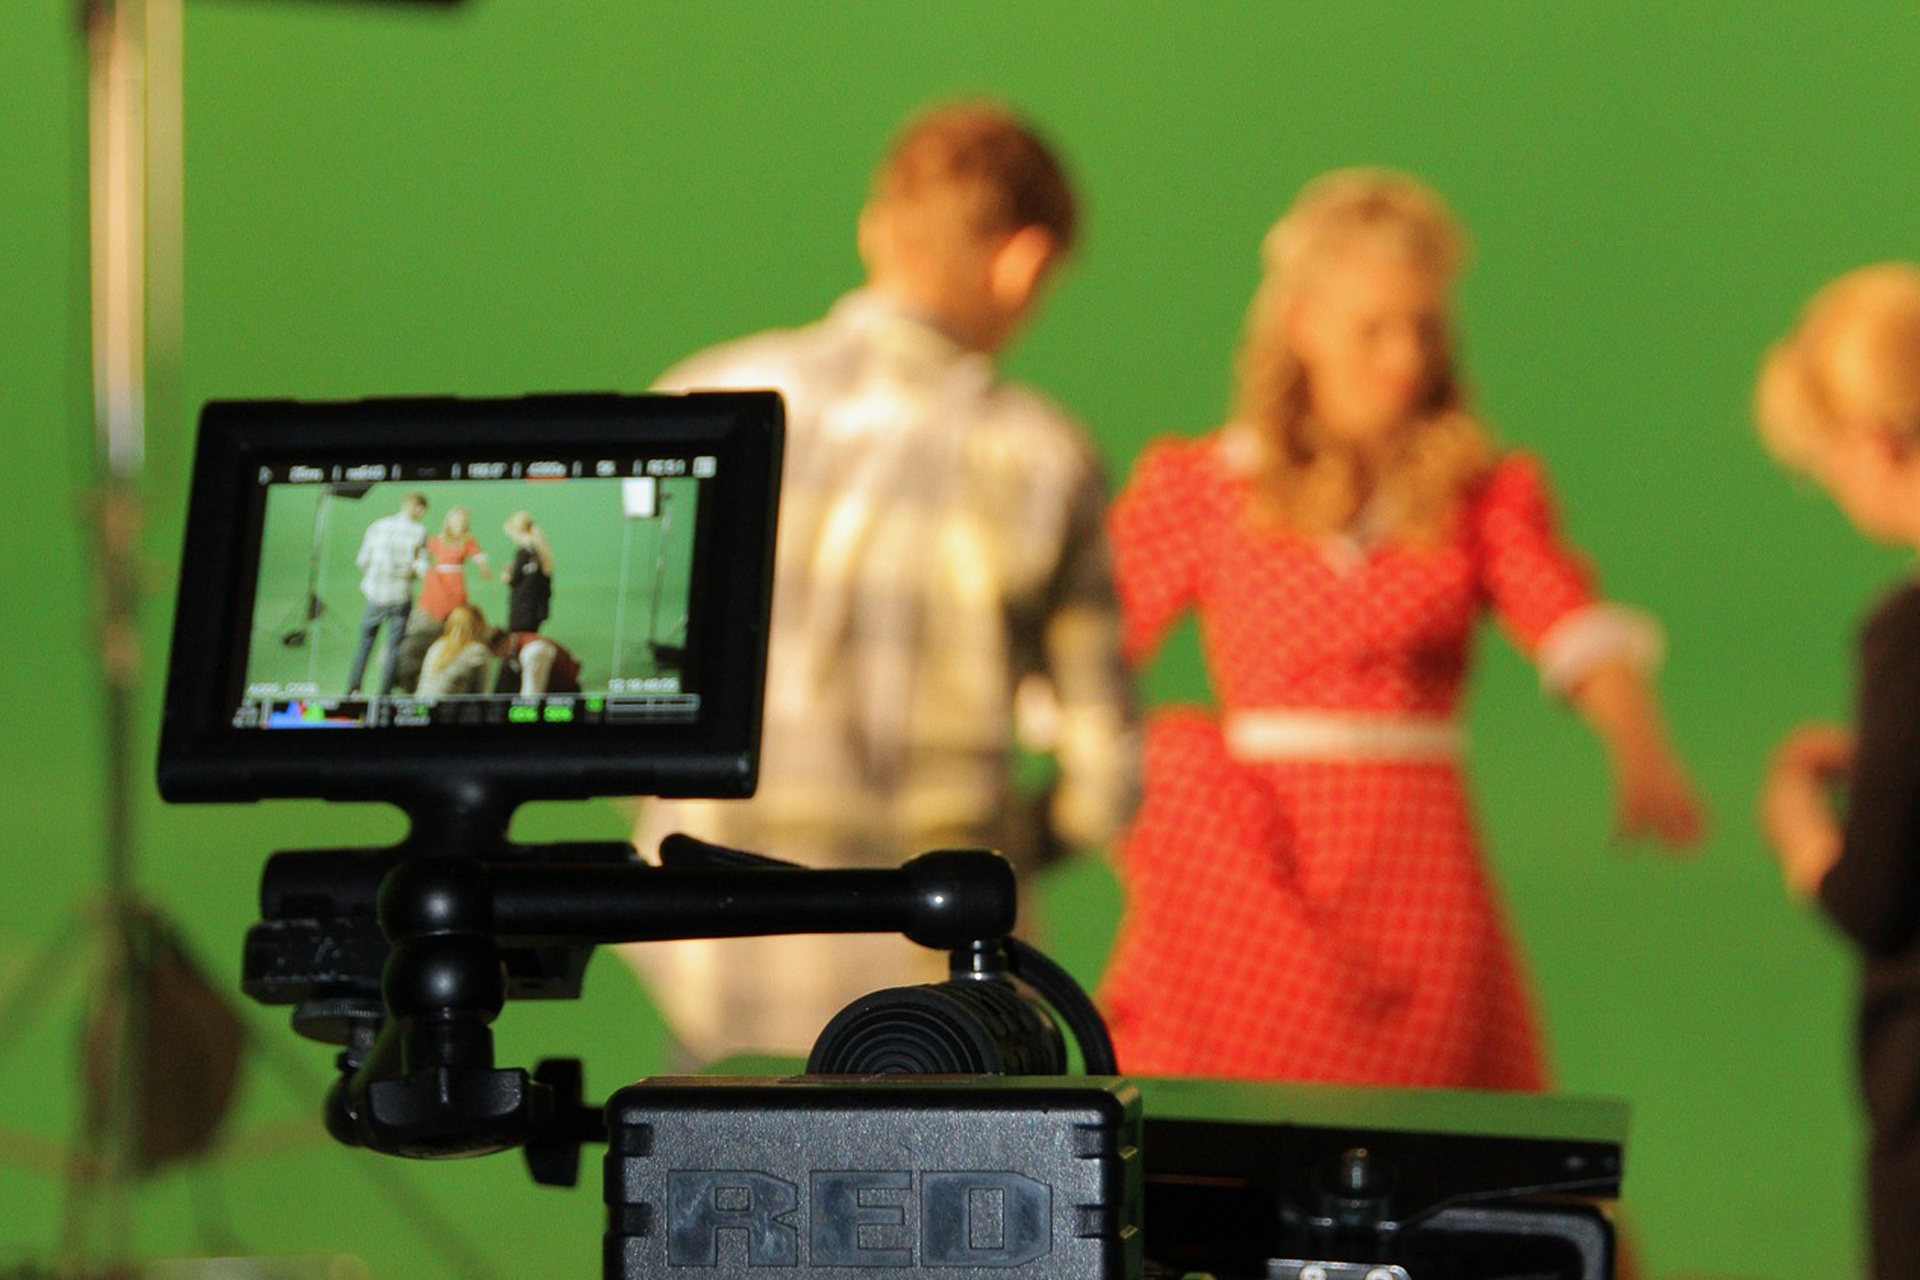 Actors in front of camera with green screen